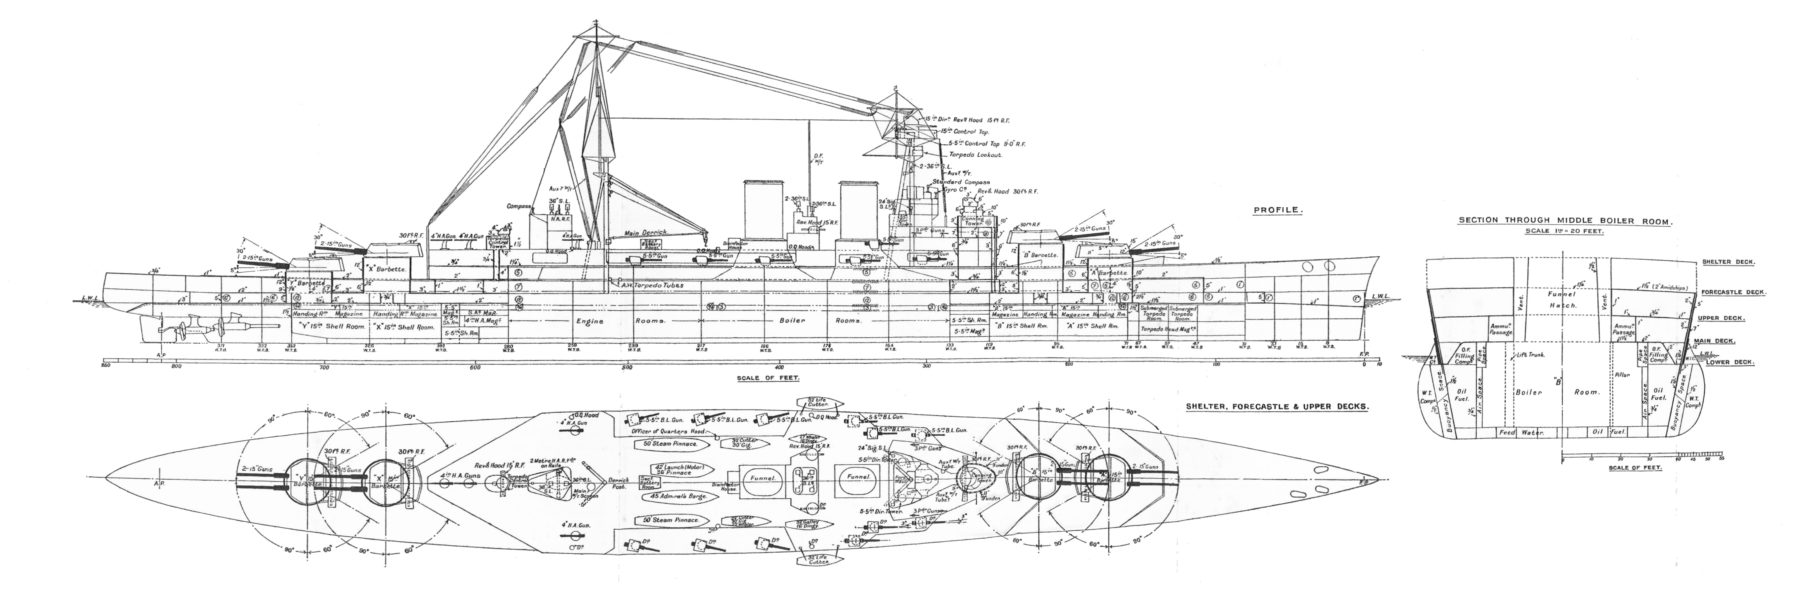 Outline drawn from the original Blueprints for the 1936 edition of warships today.